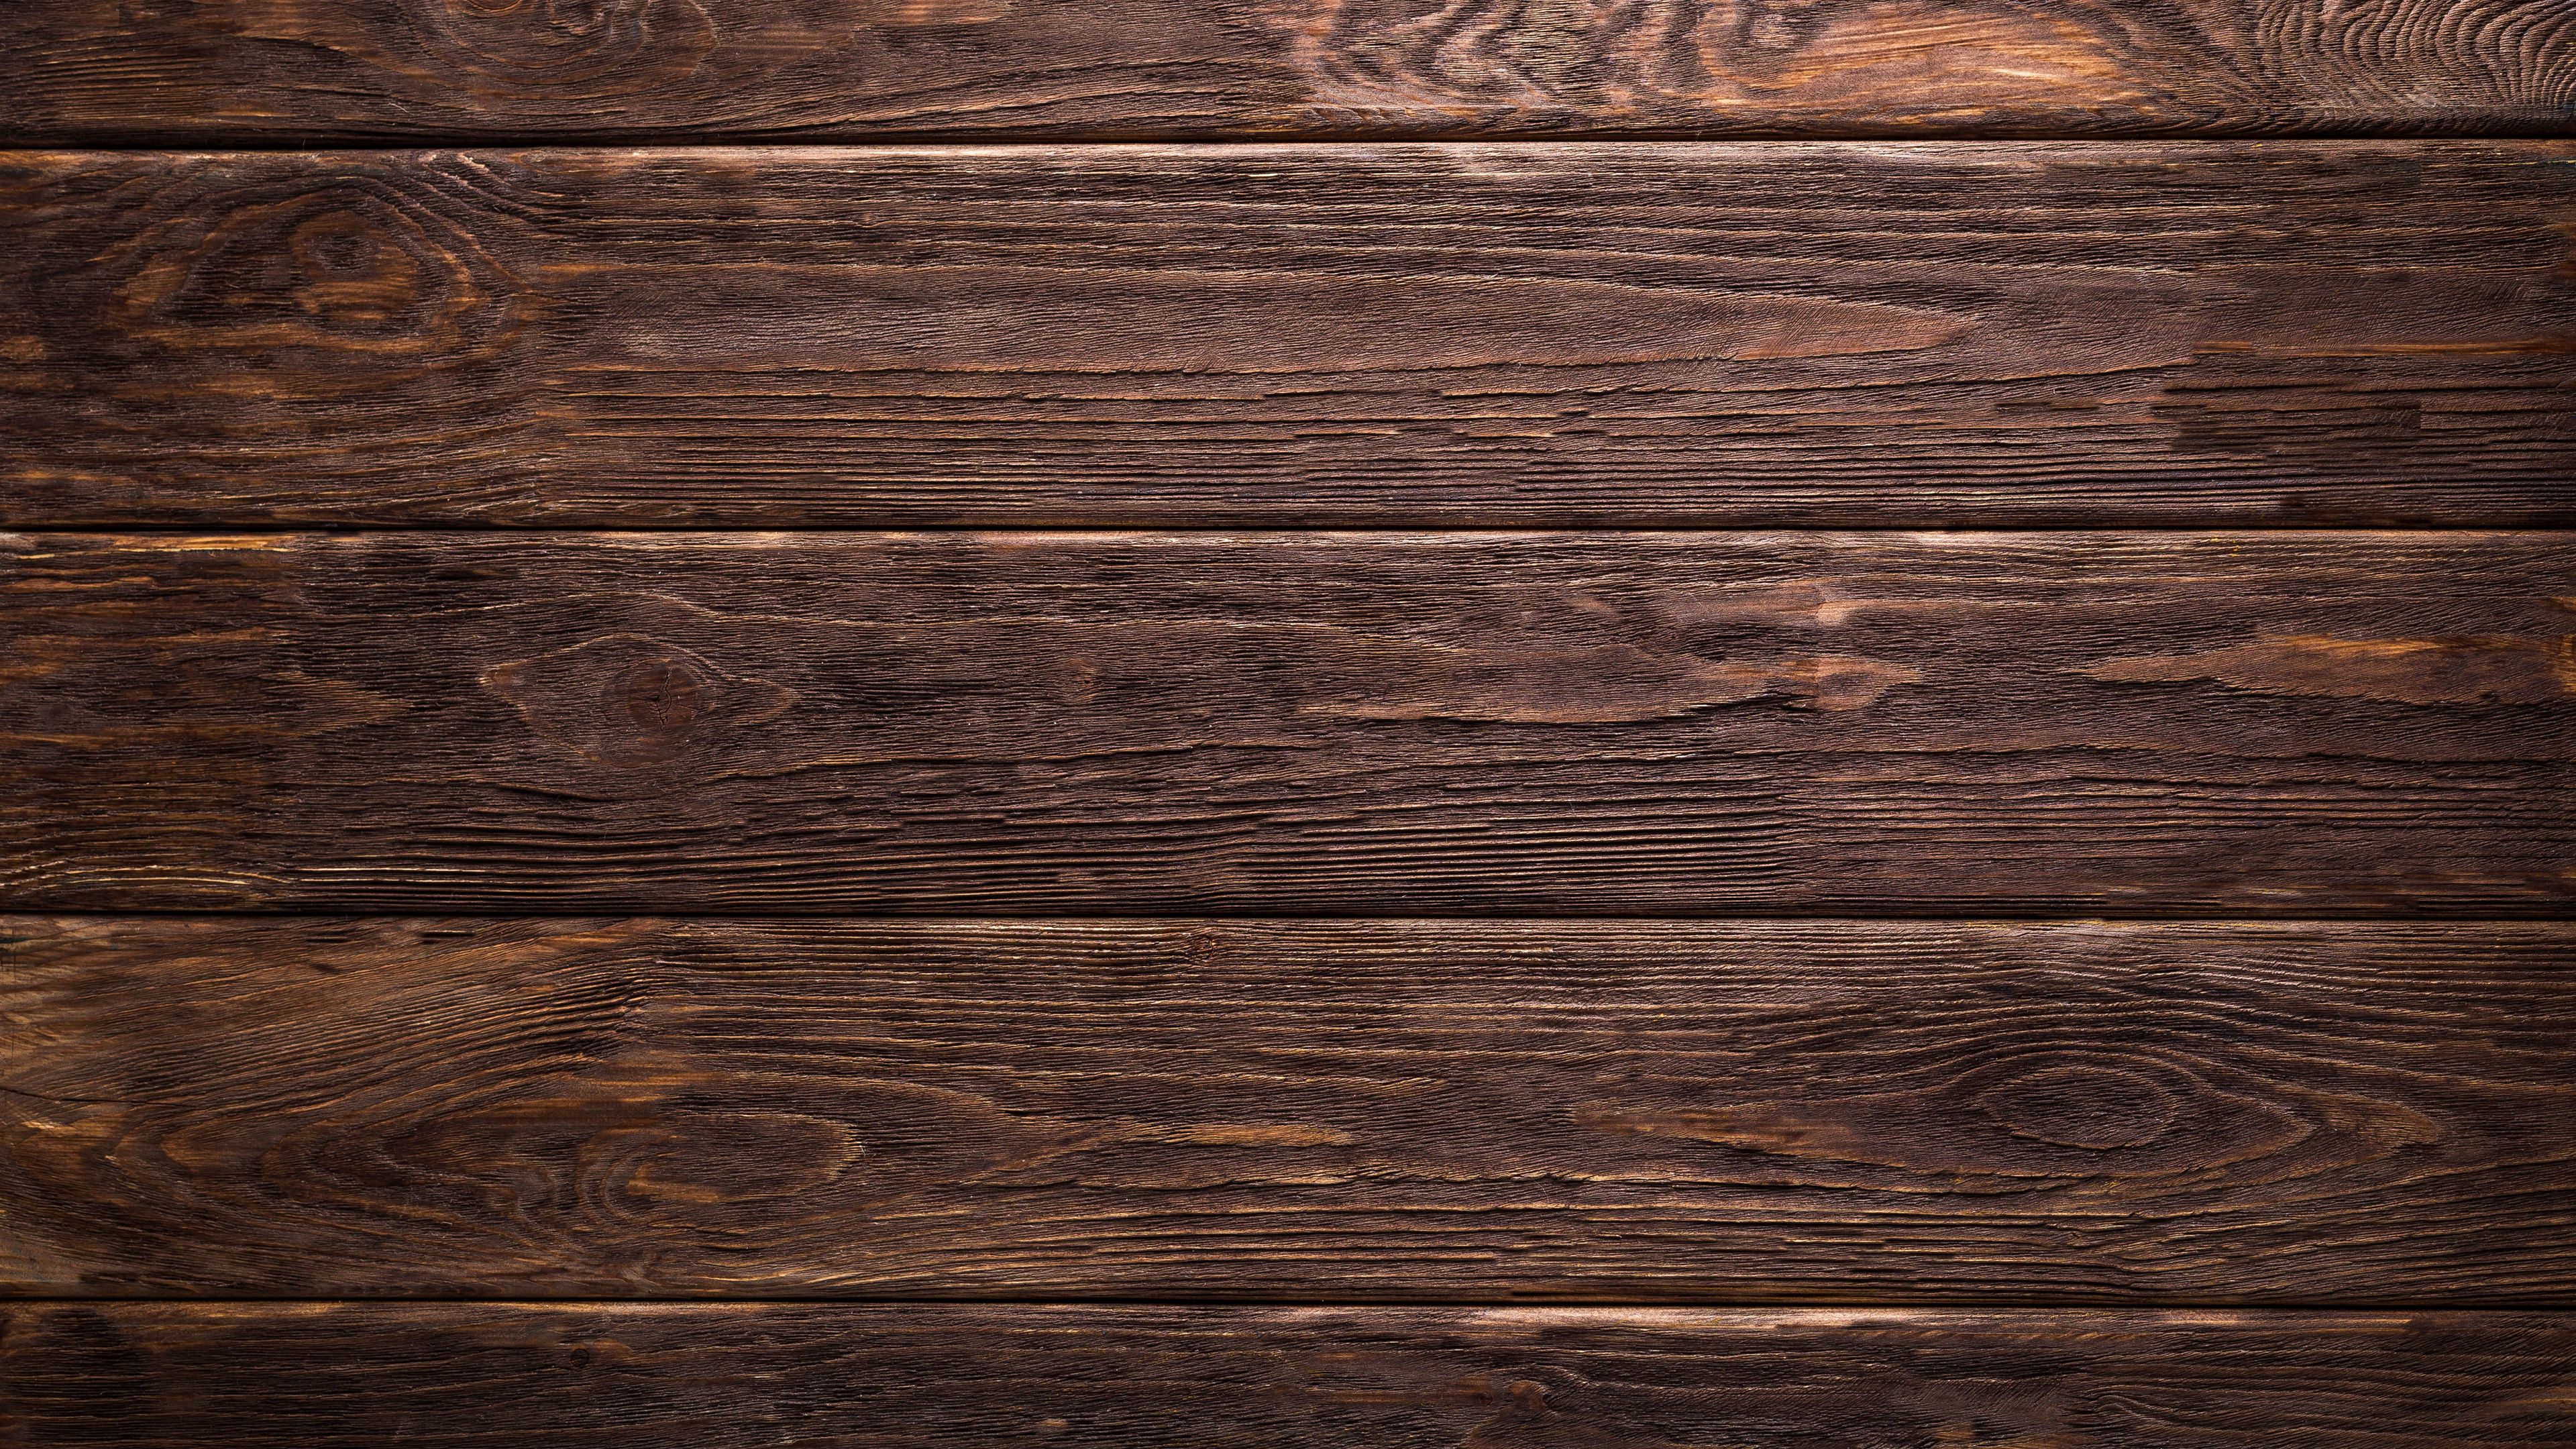 3840 X 2160 Wood Wallpapers